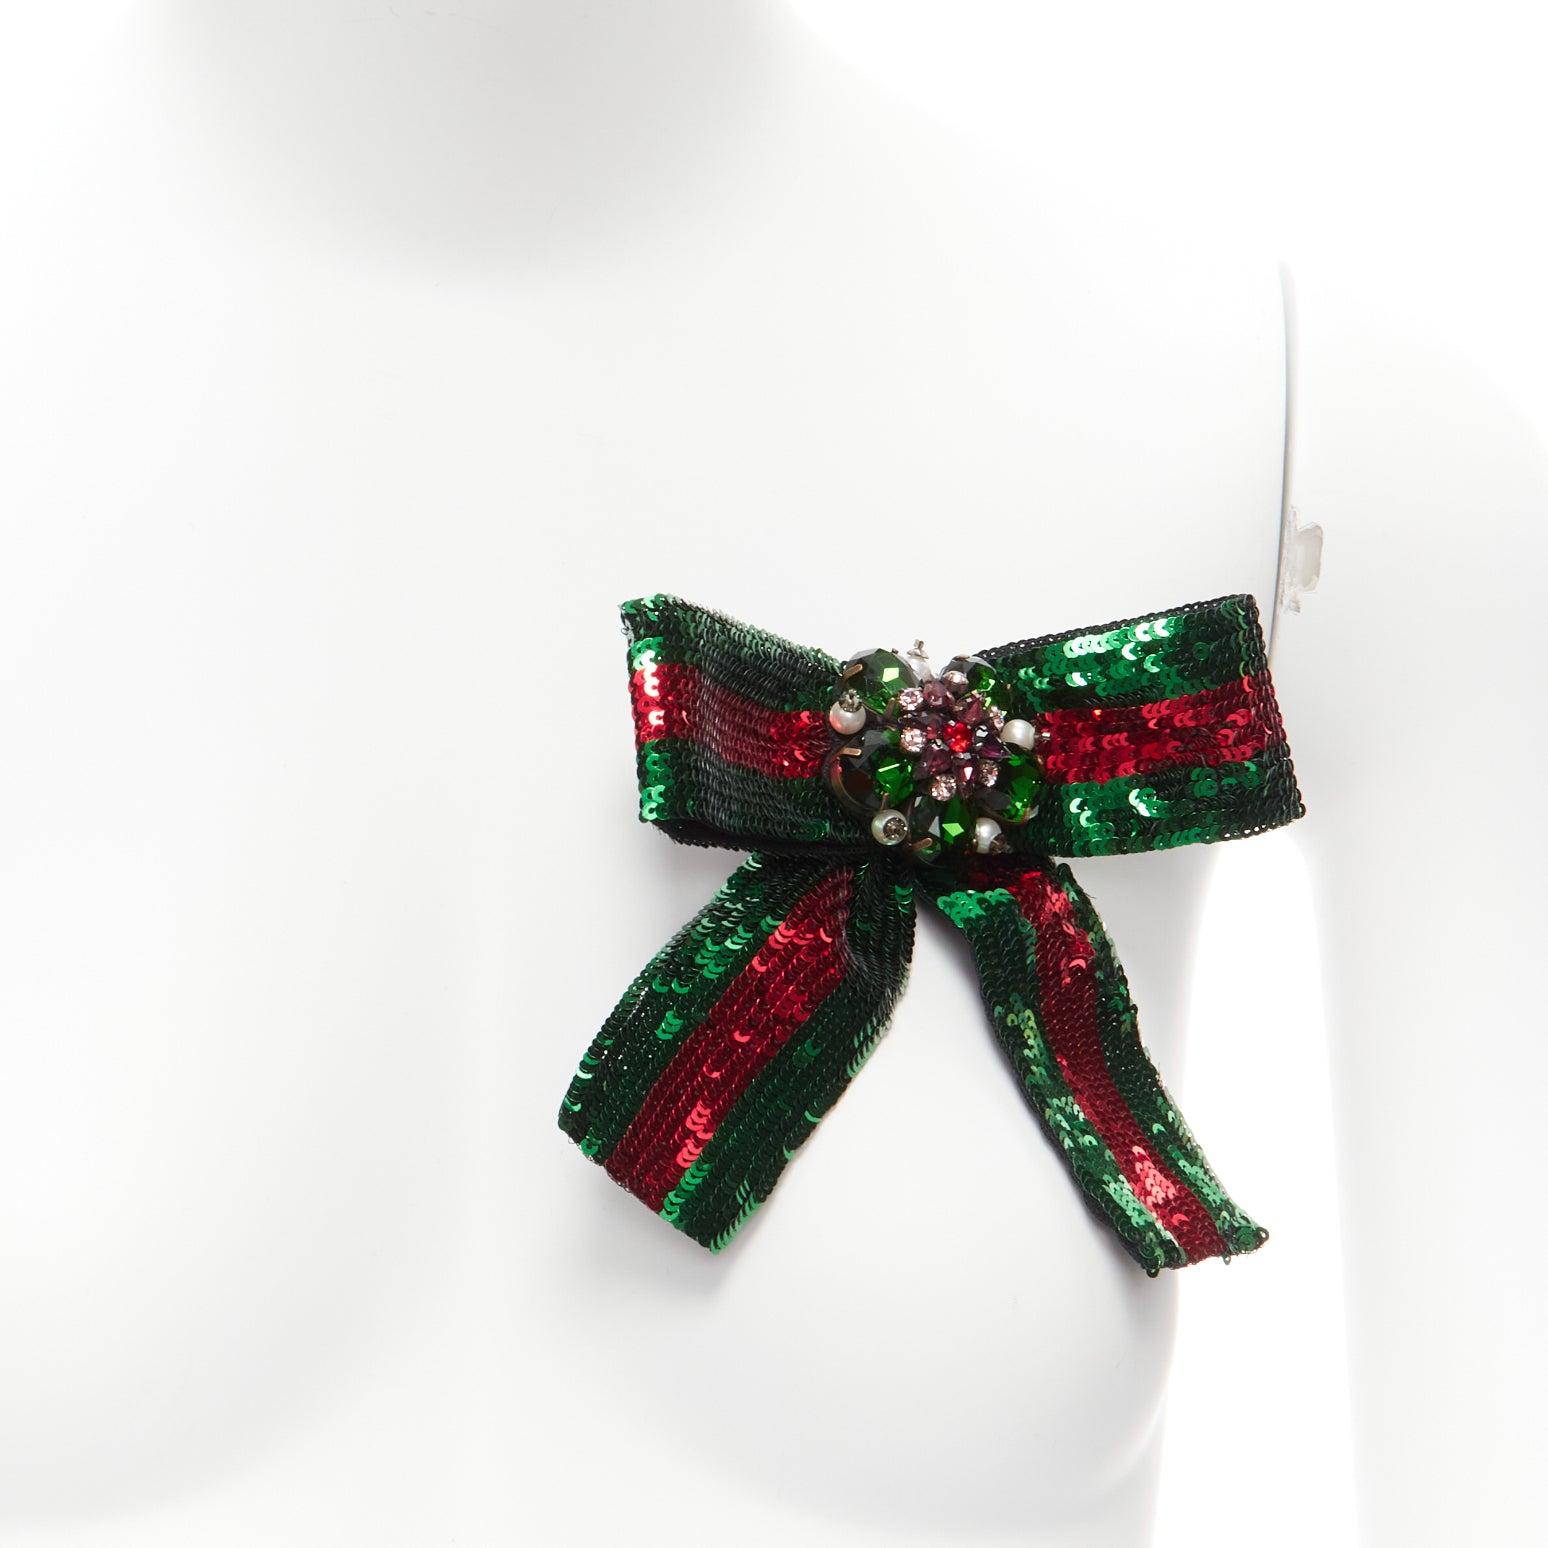 `GUCCI red green signature web sequins crystal bead embellished bow brooch
Reference: TGAS/D00532
Brand: Gucci
Designer: Alessandro Michele
Material: Metal, Fabric
Color: Red, Green
Pattern: Striped
Closure: Pin
Lining: Black